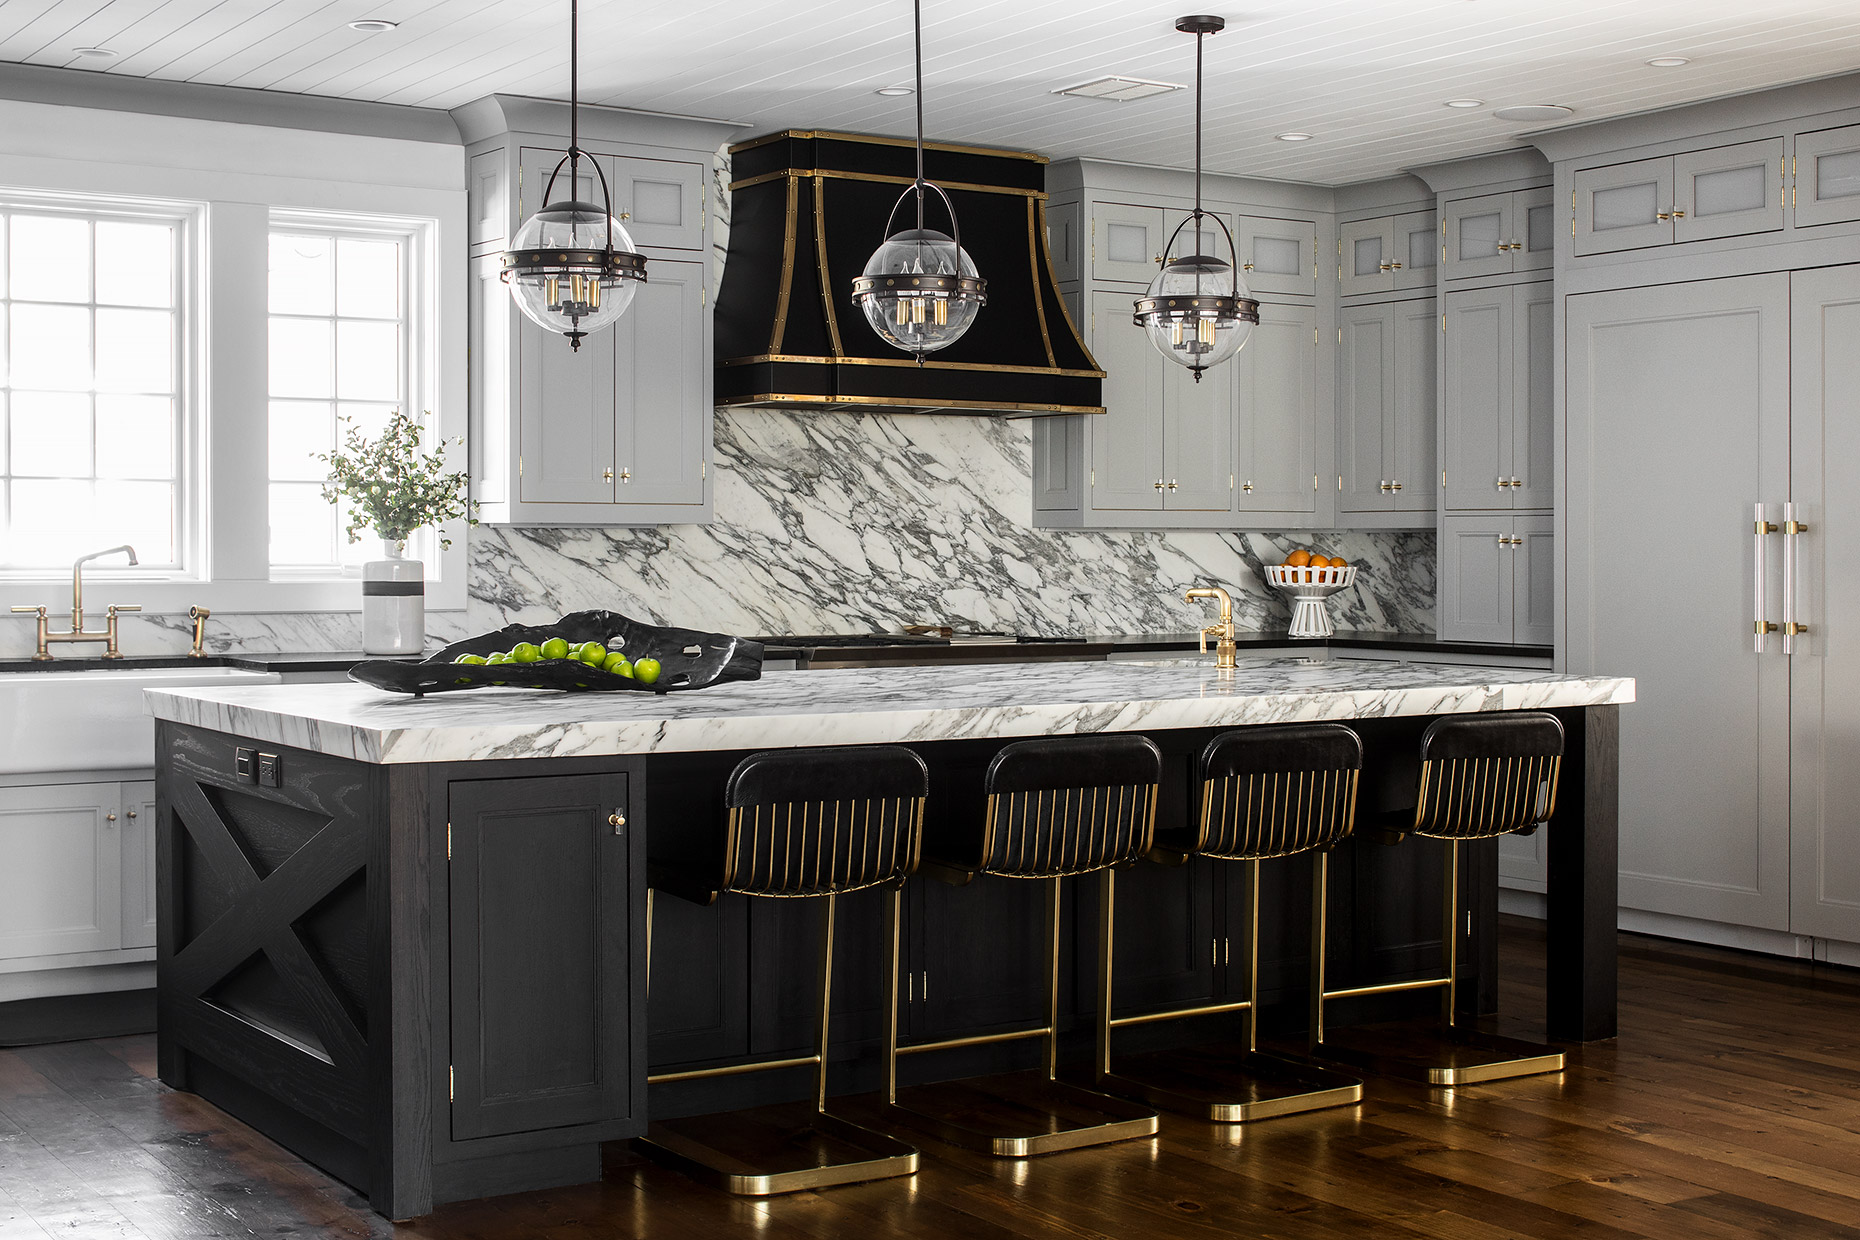 “I find that most of my clients want a light, bright, and airy room, so cladding a kitchen in a heavier color or dark tones needs to be offset with tons of natural light and an open floor plan or higher ceilings,” says Karen Wolf of Karen B. Wolf Interiors. The gleaming brass hardware and fixtures provide a bright contrast to the black. Opting for a matte finish on the island also dials down the intensity of the black. Photo courtesy of Karen B. Wolf.
